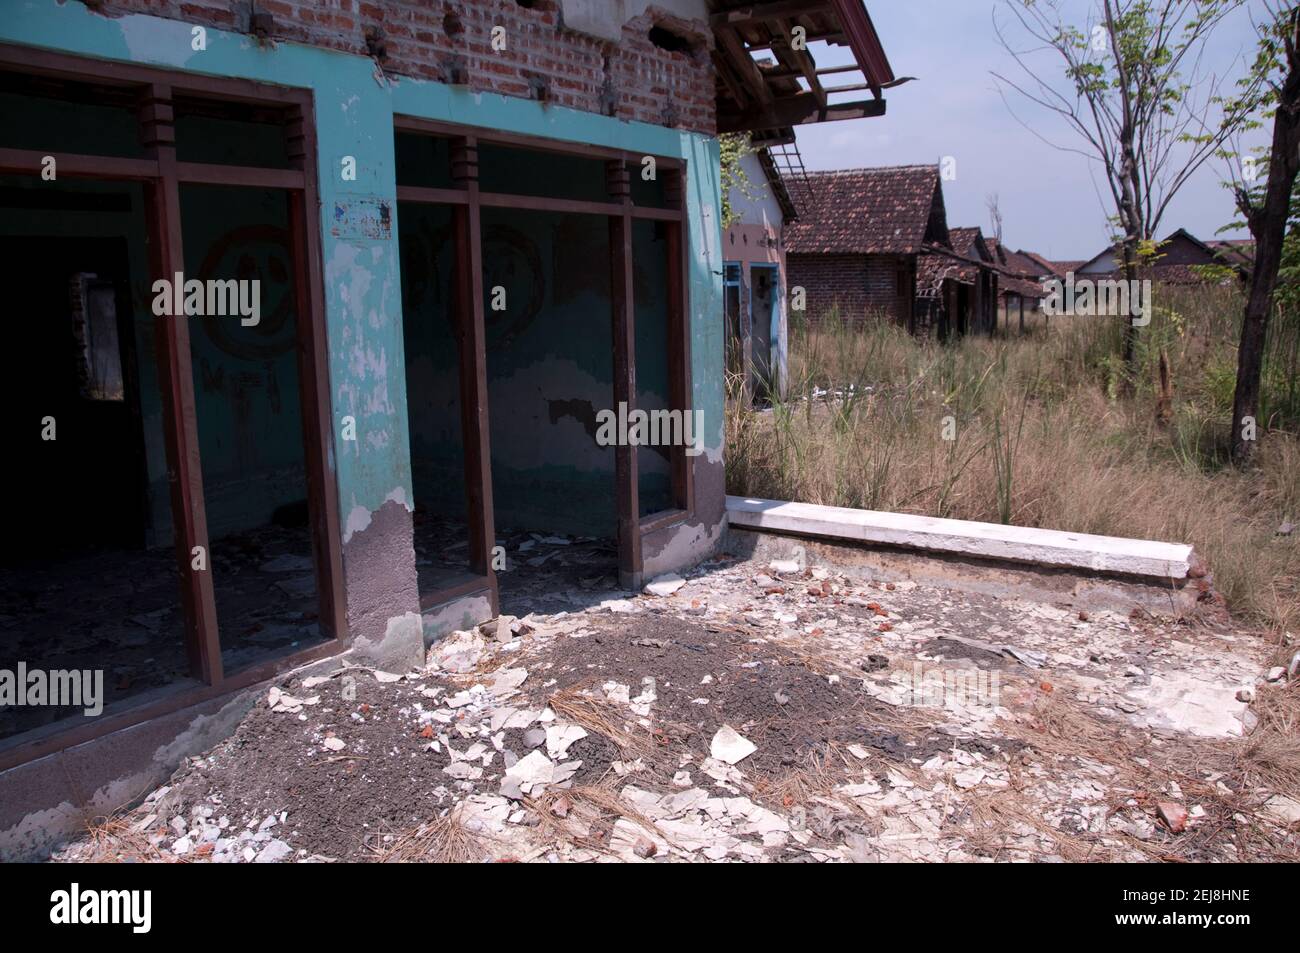 Abandoned house following flooding by mud lake environmental disaster which developed after drilling incident, Porong Sidoarjo, near Surabaya, East Ja Stock Photo